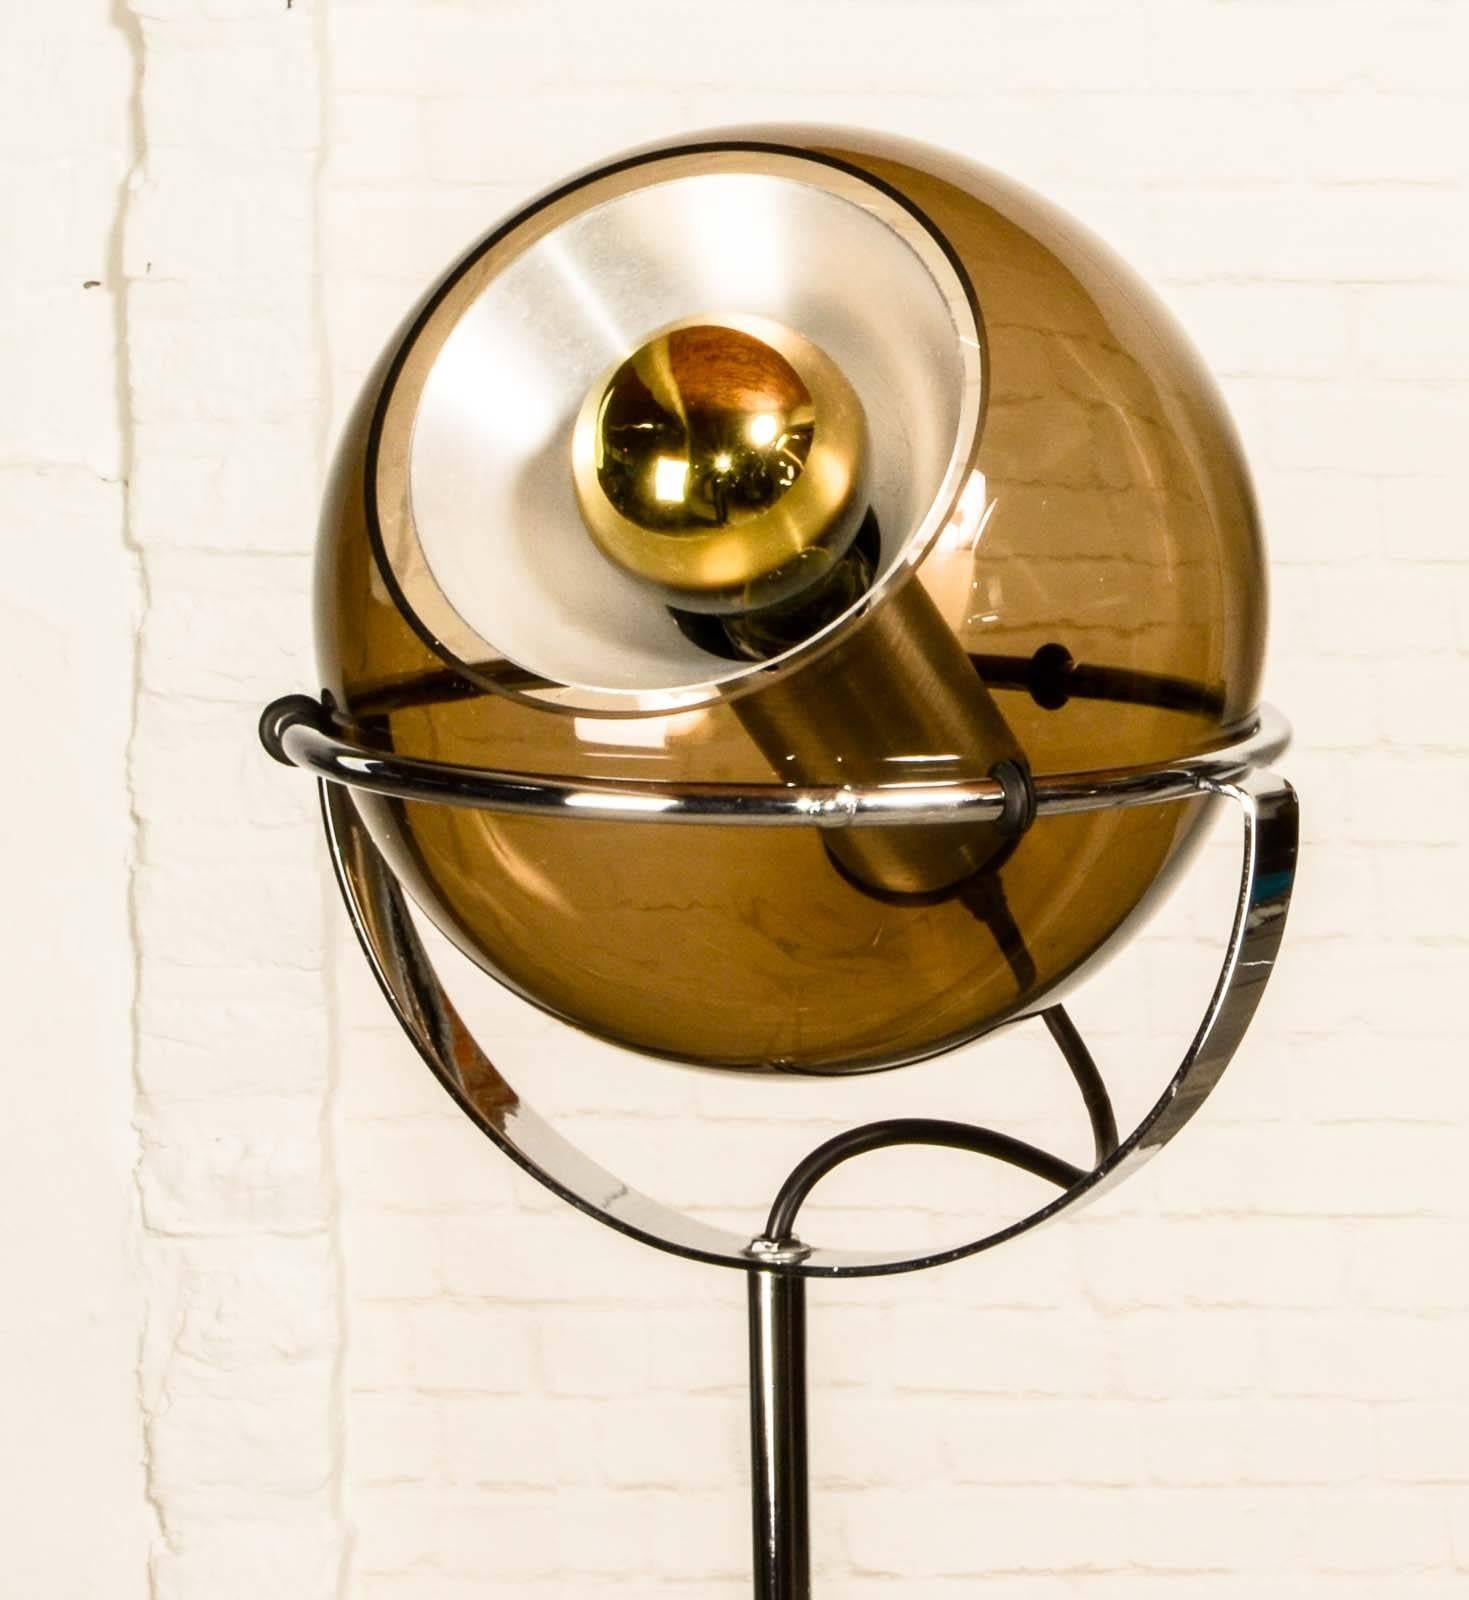 Set of two Dutch design globe floor lamps designed by Frank Ligtelijn. Produced in the 1960s for RAAK Amsterdam. The height of the chrome foot is adjustable up to ca. 150 cm. The smoked glass balls and the chrome standards are both in excellent